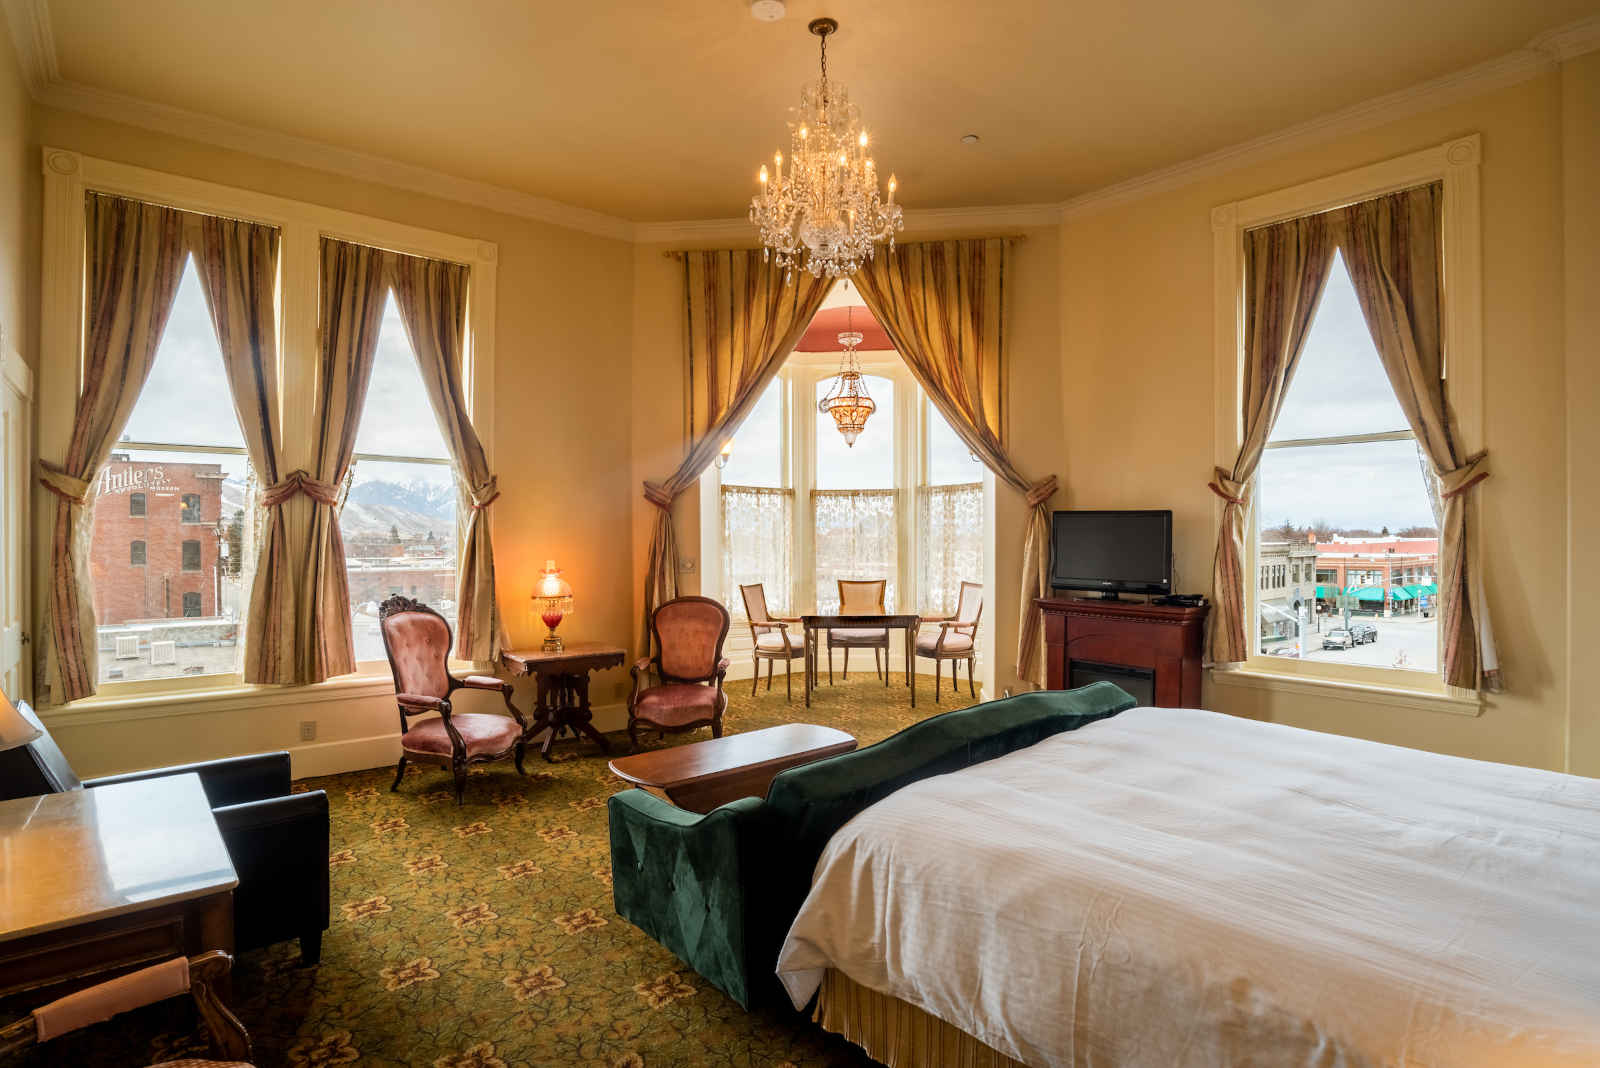 Cupola Suite in the historic Geiser Grand Hotel in Baker City, Oregon.